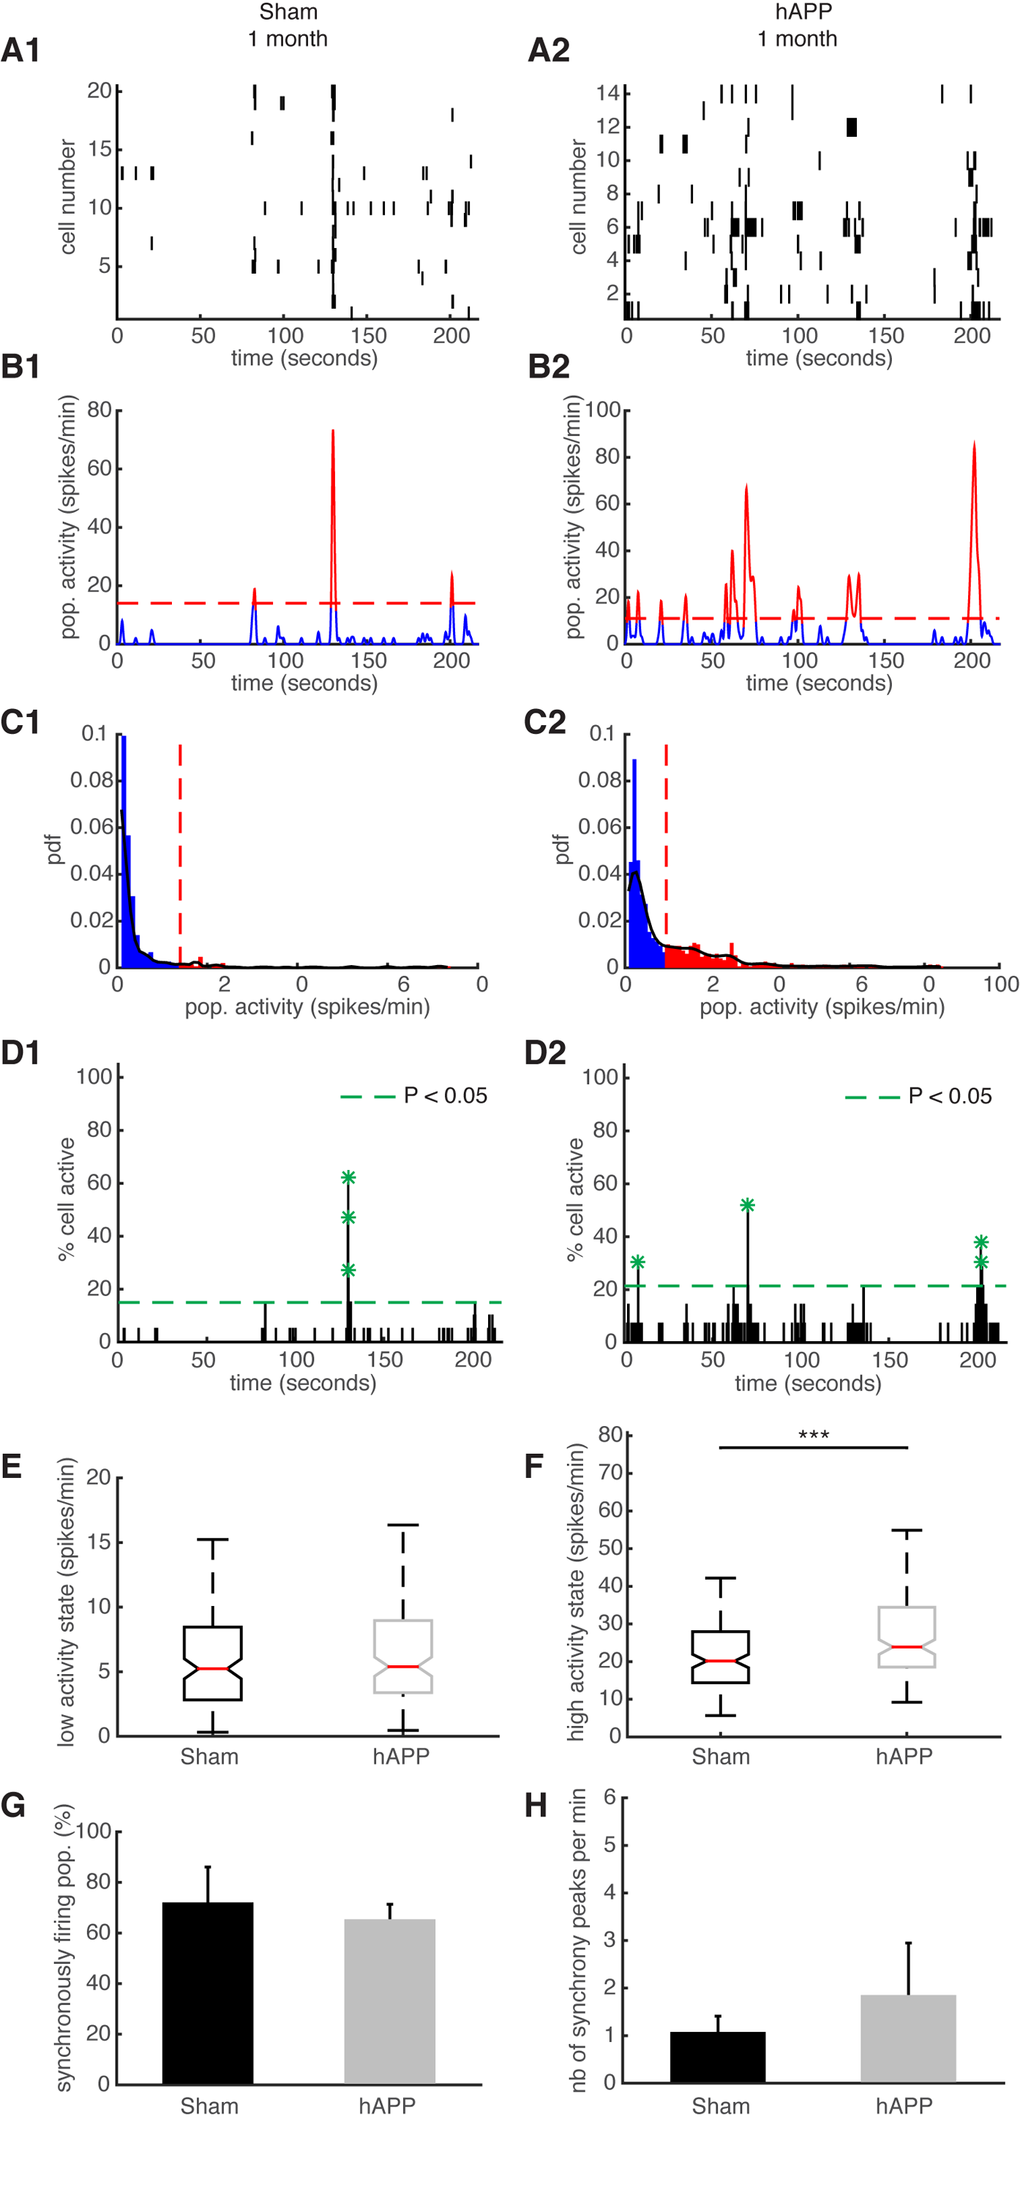 Synchronous firing of simultaneously recorded neurons in sham and hAPP mice 1 mpi. (A) Representative raster plots for one population of simultaneously recorded neurons. Each row corresponds to the spiking activity of one neuron. (B) Mean neural activity for the populations in A. The activity was smoothed through Gaussian filtering. The red periods correspond to the high activity states and the blue periods to the low activity states. The dotted red line represents the computed threshold between the two states. (C) Probability density function (pdf) of the population activity exhibited in (B). The black line represents the smoothed pdf, through Gaussian filtering. Red bars represent the high activity states and blue bars the low activity states. (D) Histogram representing the percentage of cells active in small time bins (~ 0.144 sec), for the population activity in (A). Asterisks mark significant peaks of synchrony. (E) Boxplots of low activity states for each mouse group (spikes/min). (F) Boxplots of high activity states for each mouse group (spikes/min). (G) Percentage of populations (simultaneously imaged neurons) exhibiting synchronous activity. (H) Mean number of synchrony peaks per minute for the different animal groups. (1) sham and (2) hAPP mice.